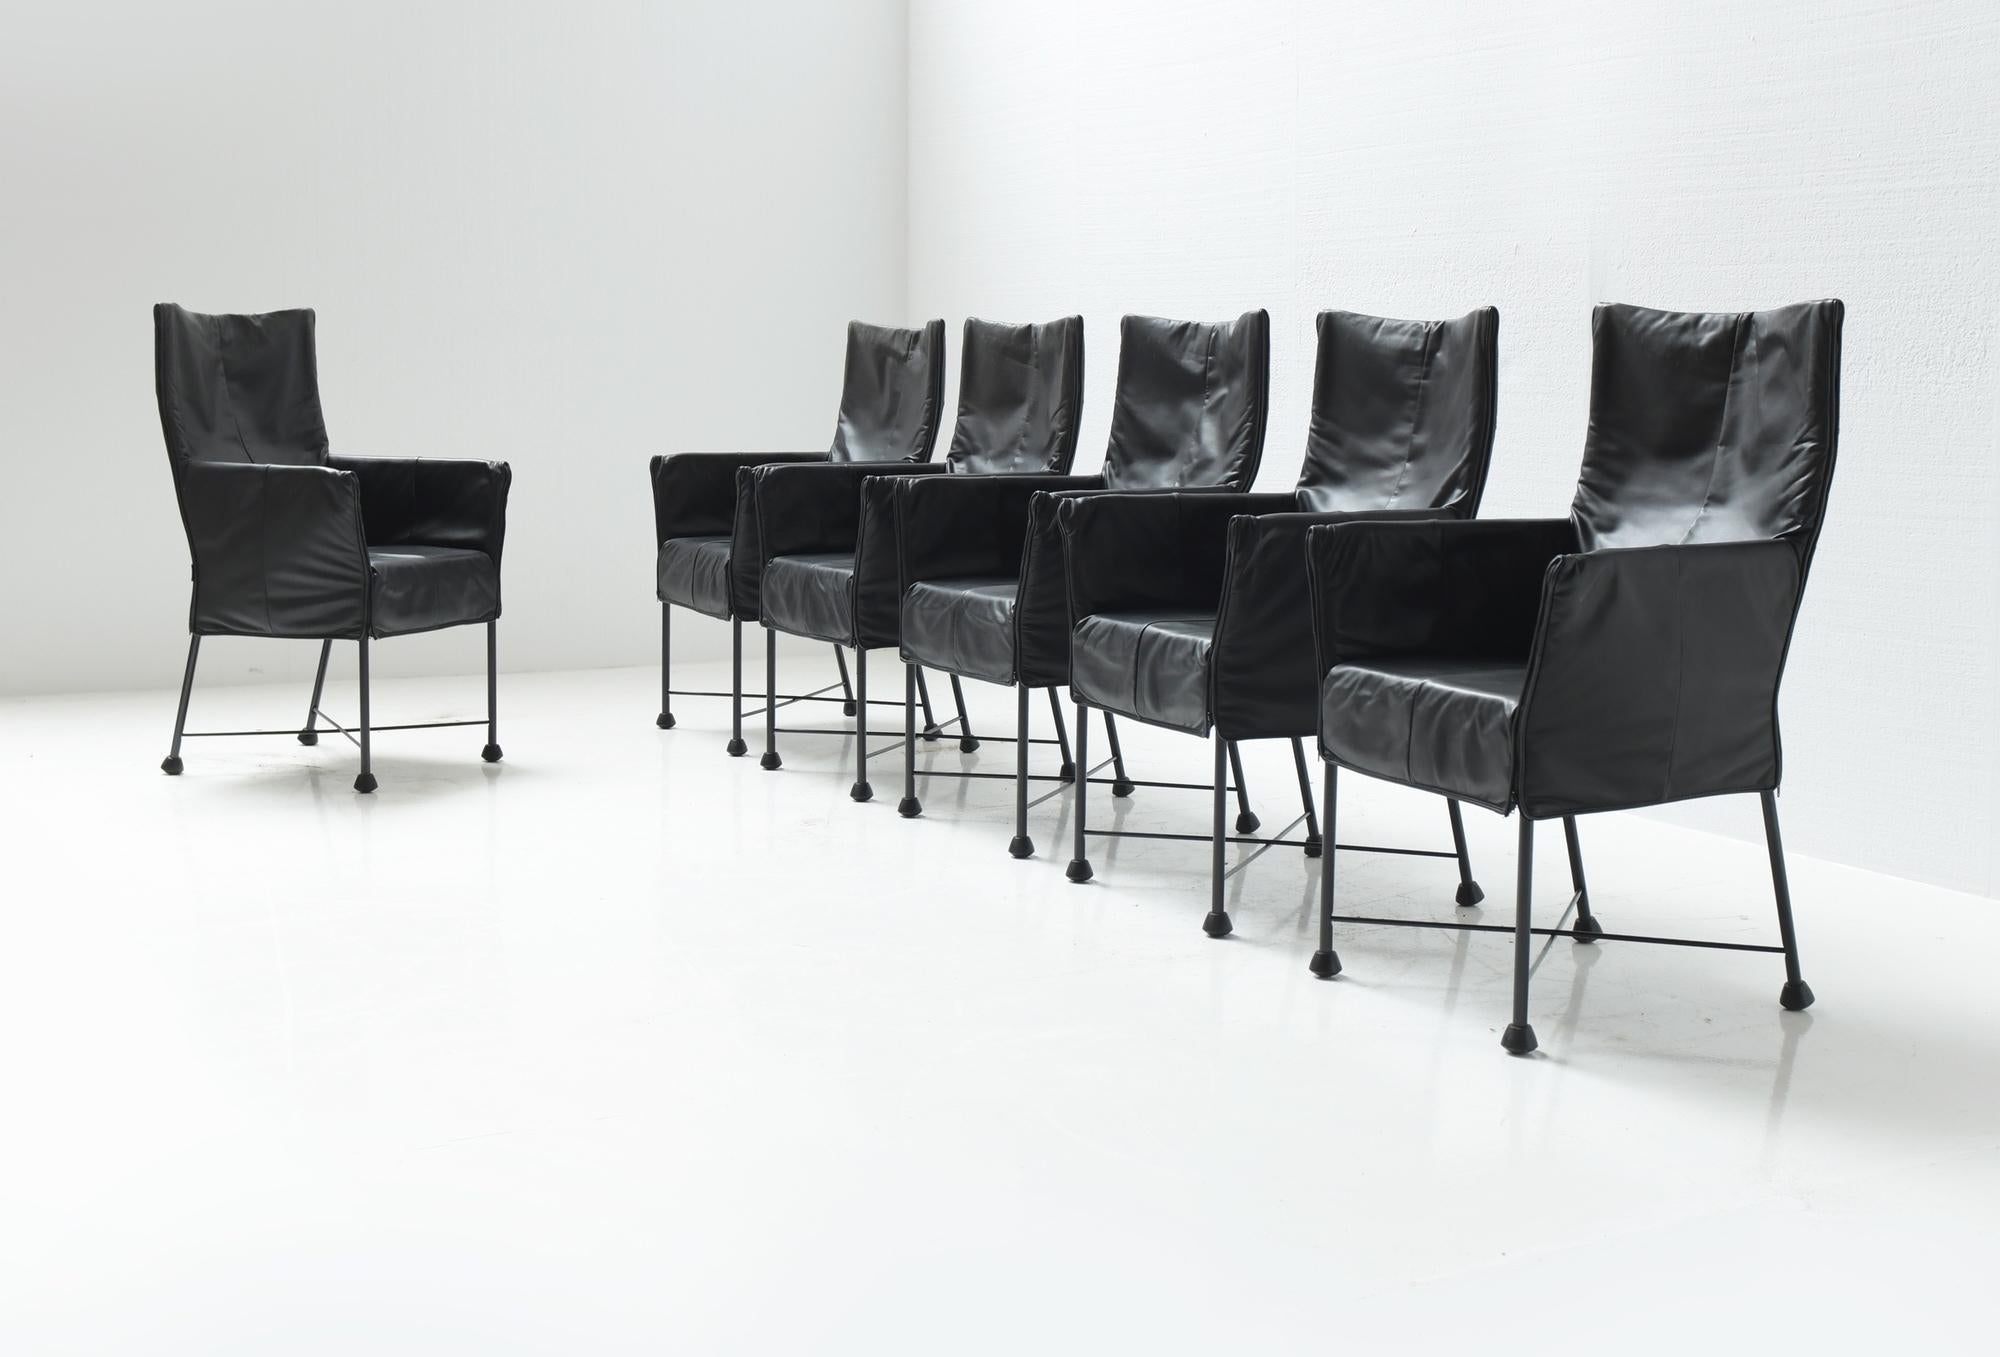 Nice matching set of 6 Chaplin chairs in their original black leather.
Designed by Gerard van den Berg for Montis.
The leather has some wear but no damage or reparations

Only sold as a set.